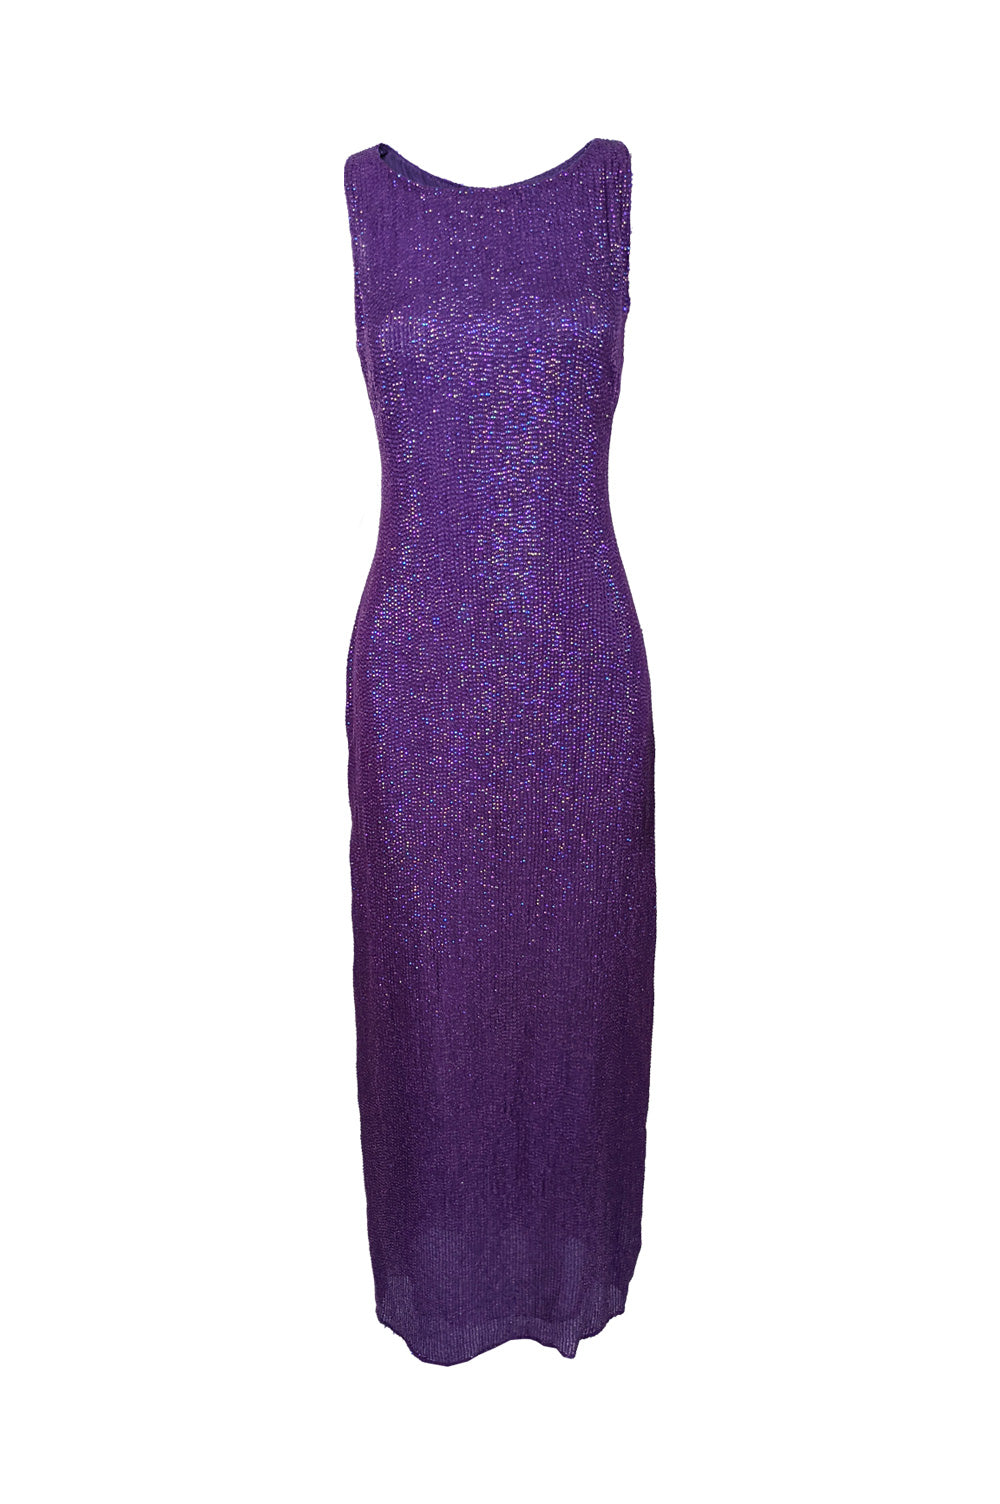 Vintage Purple Fully Sequinned Evening Maxi Dress, 1990s